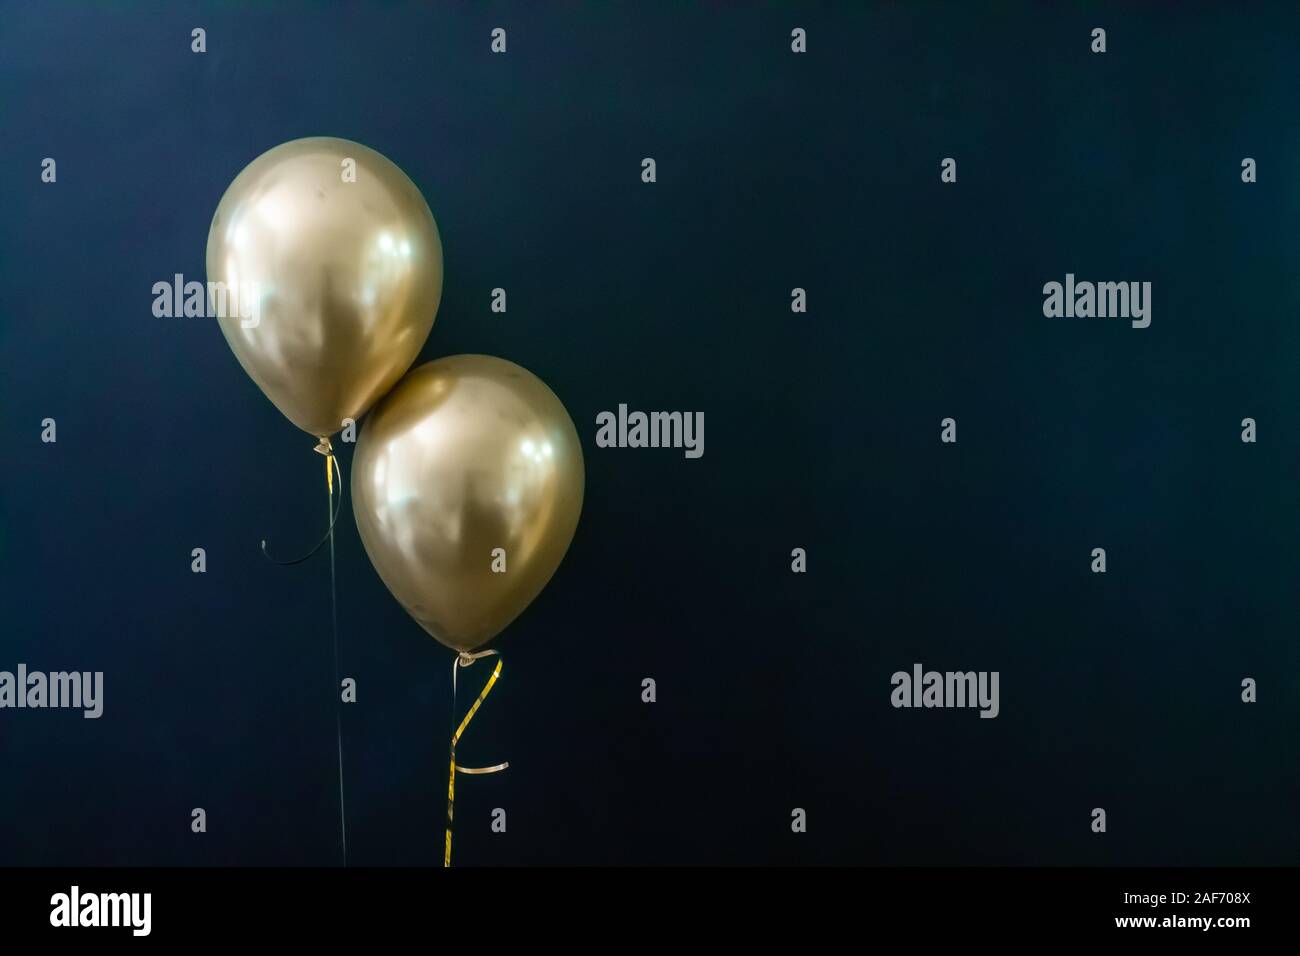 two golden balloons on a dark background. Holiday Concept, Postcard Stock Photo